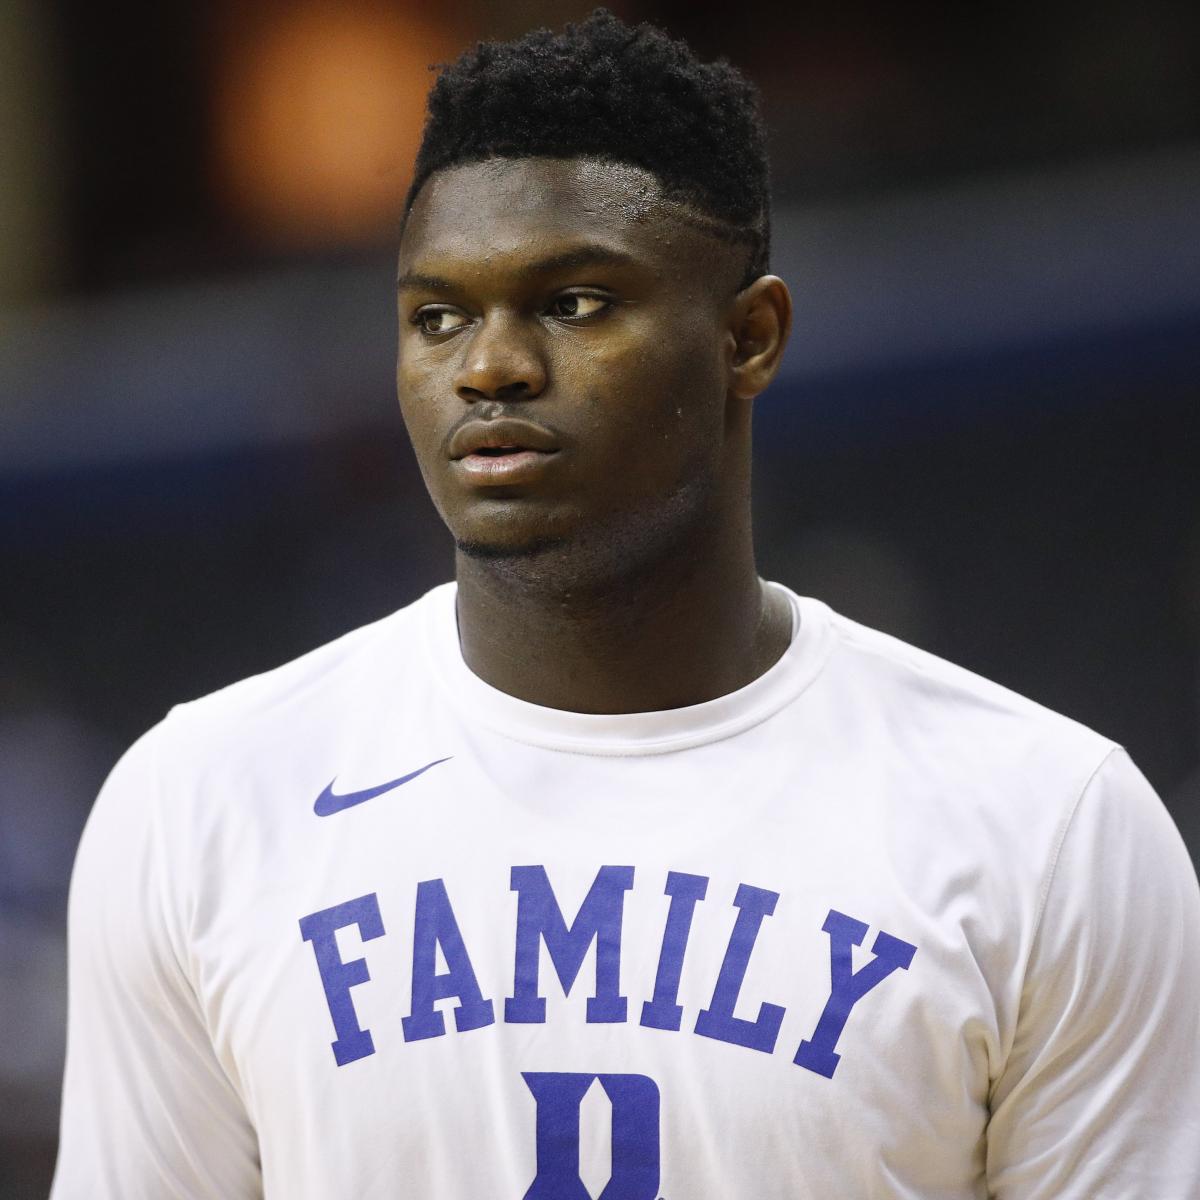 Video: Zion Williamson Wears Nike Kyrie 4s Amid Speculated Endorsement Deal | Bleacher ...1200 x 1200